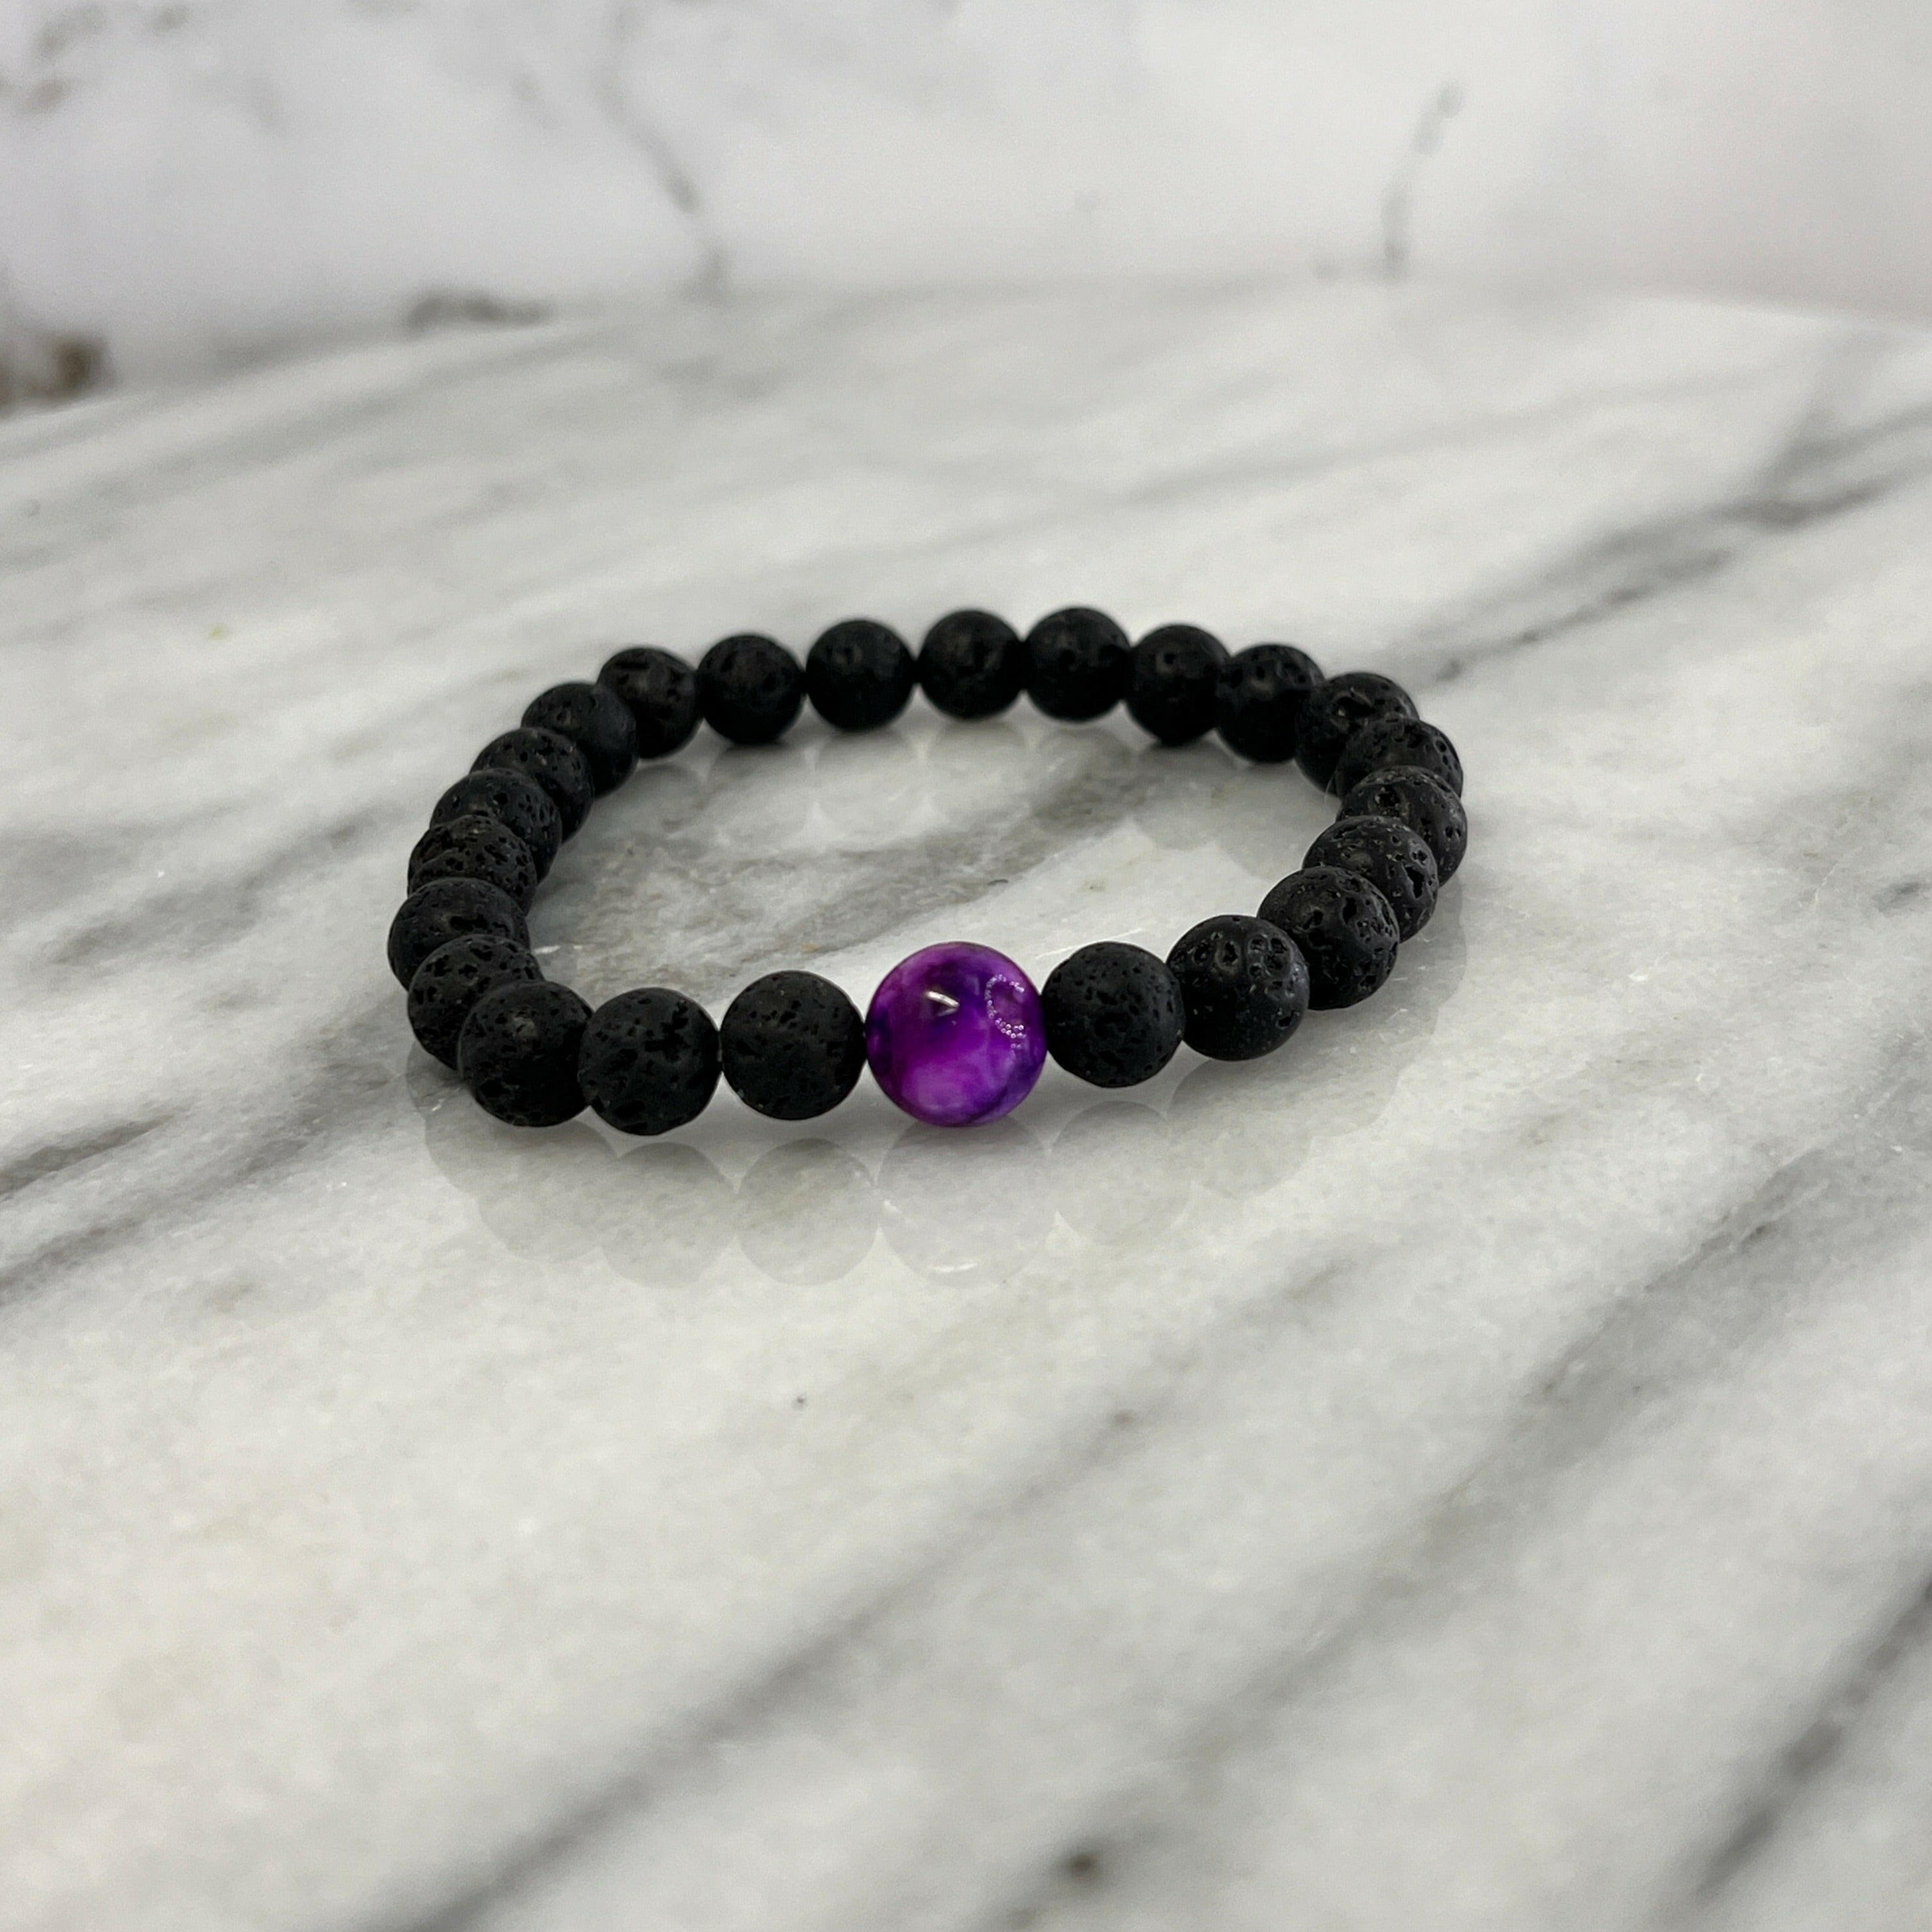 A trendy diffuser bracelet with lava stone beads for aromatherapy benefits, ideal accessory for relaxation